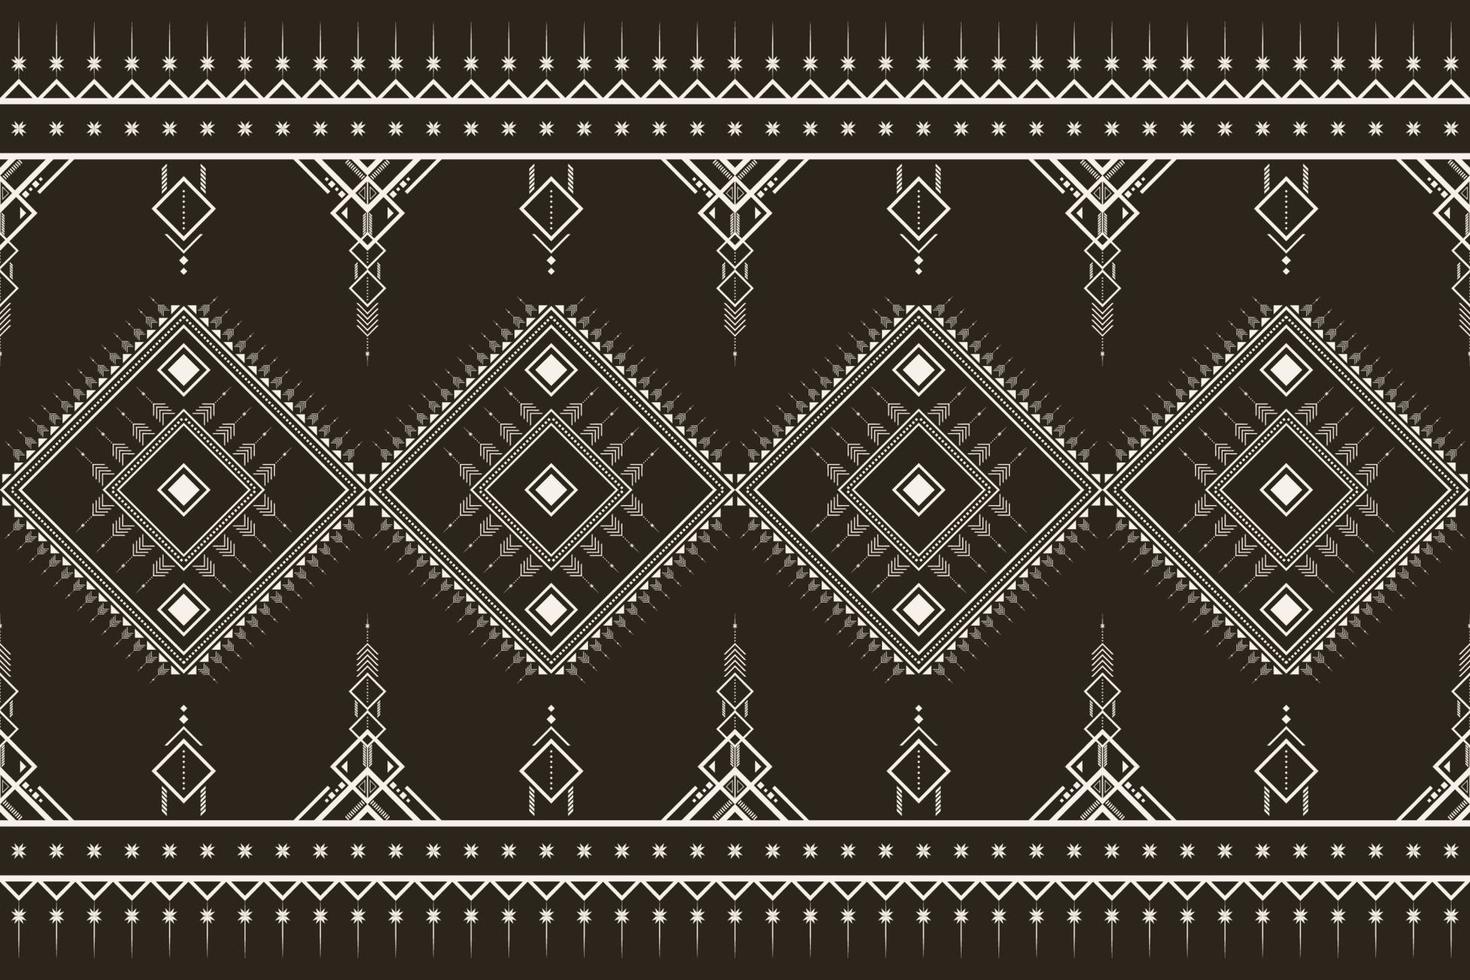 geometric ethnic pattern seamless pattern vector. style ethnic abstract geometry two tone textile. pattern for fabric, background,winter,pillow,wallpaper,carpet,decoration,ethnic,batik,decorative. vector